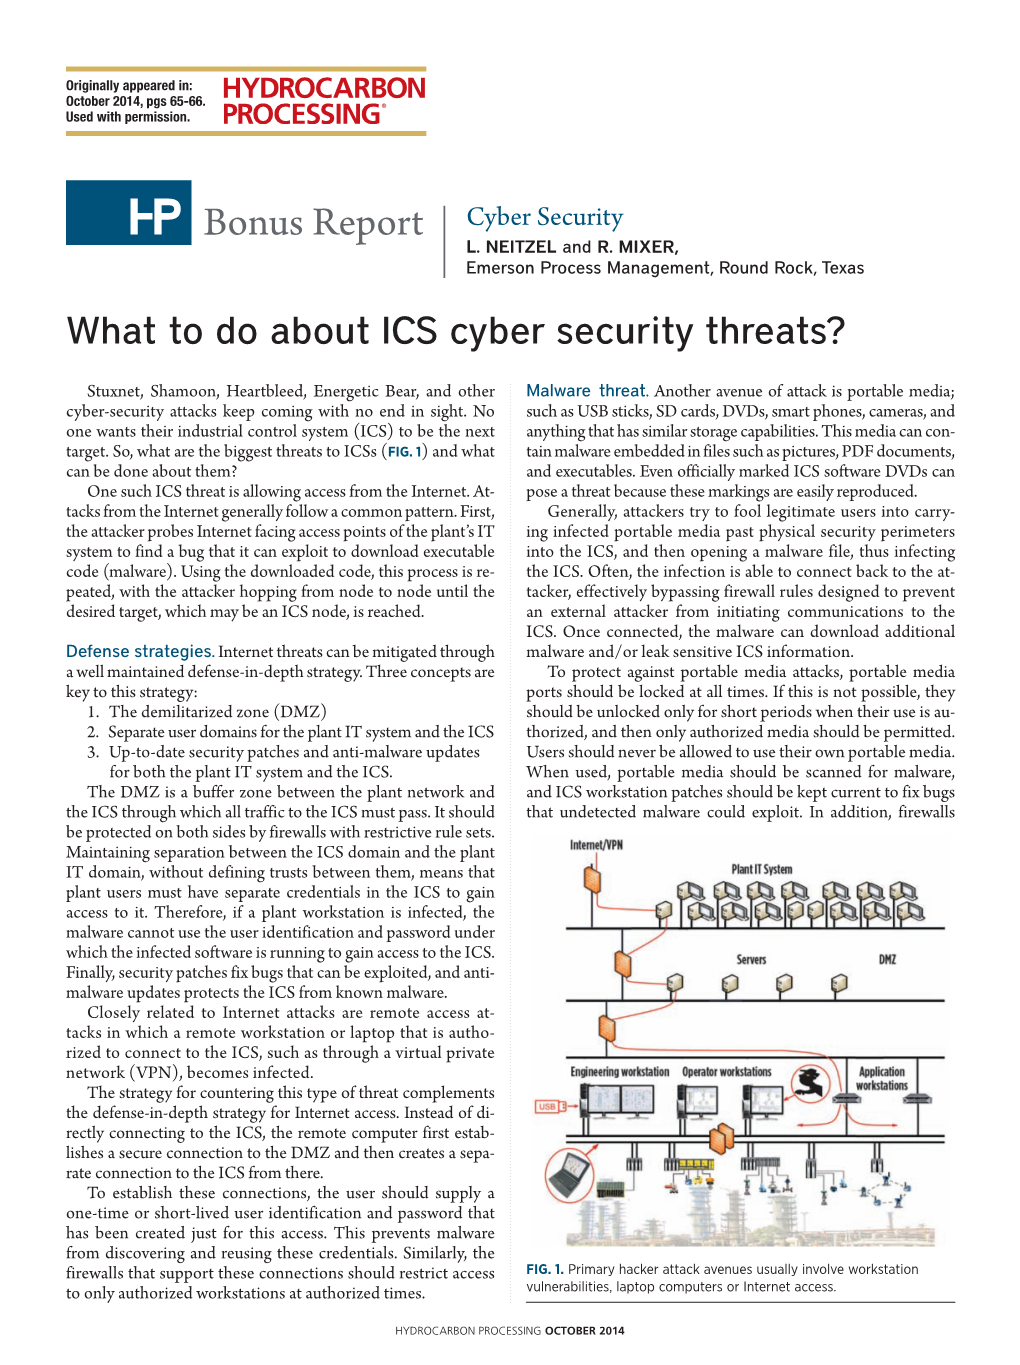 What to Do About ICS Cyber Security Threats?